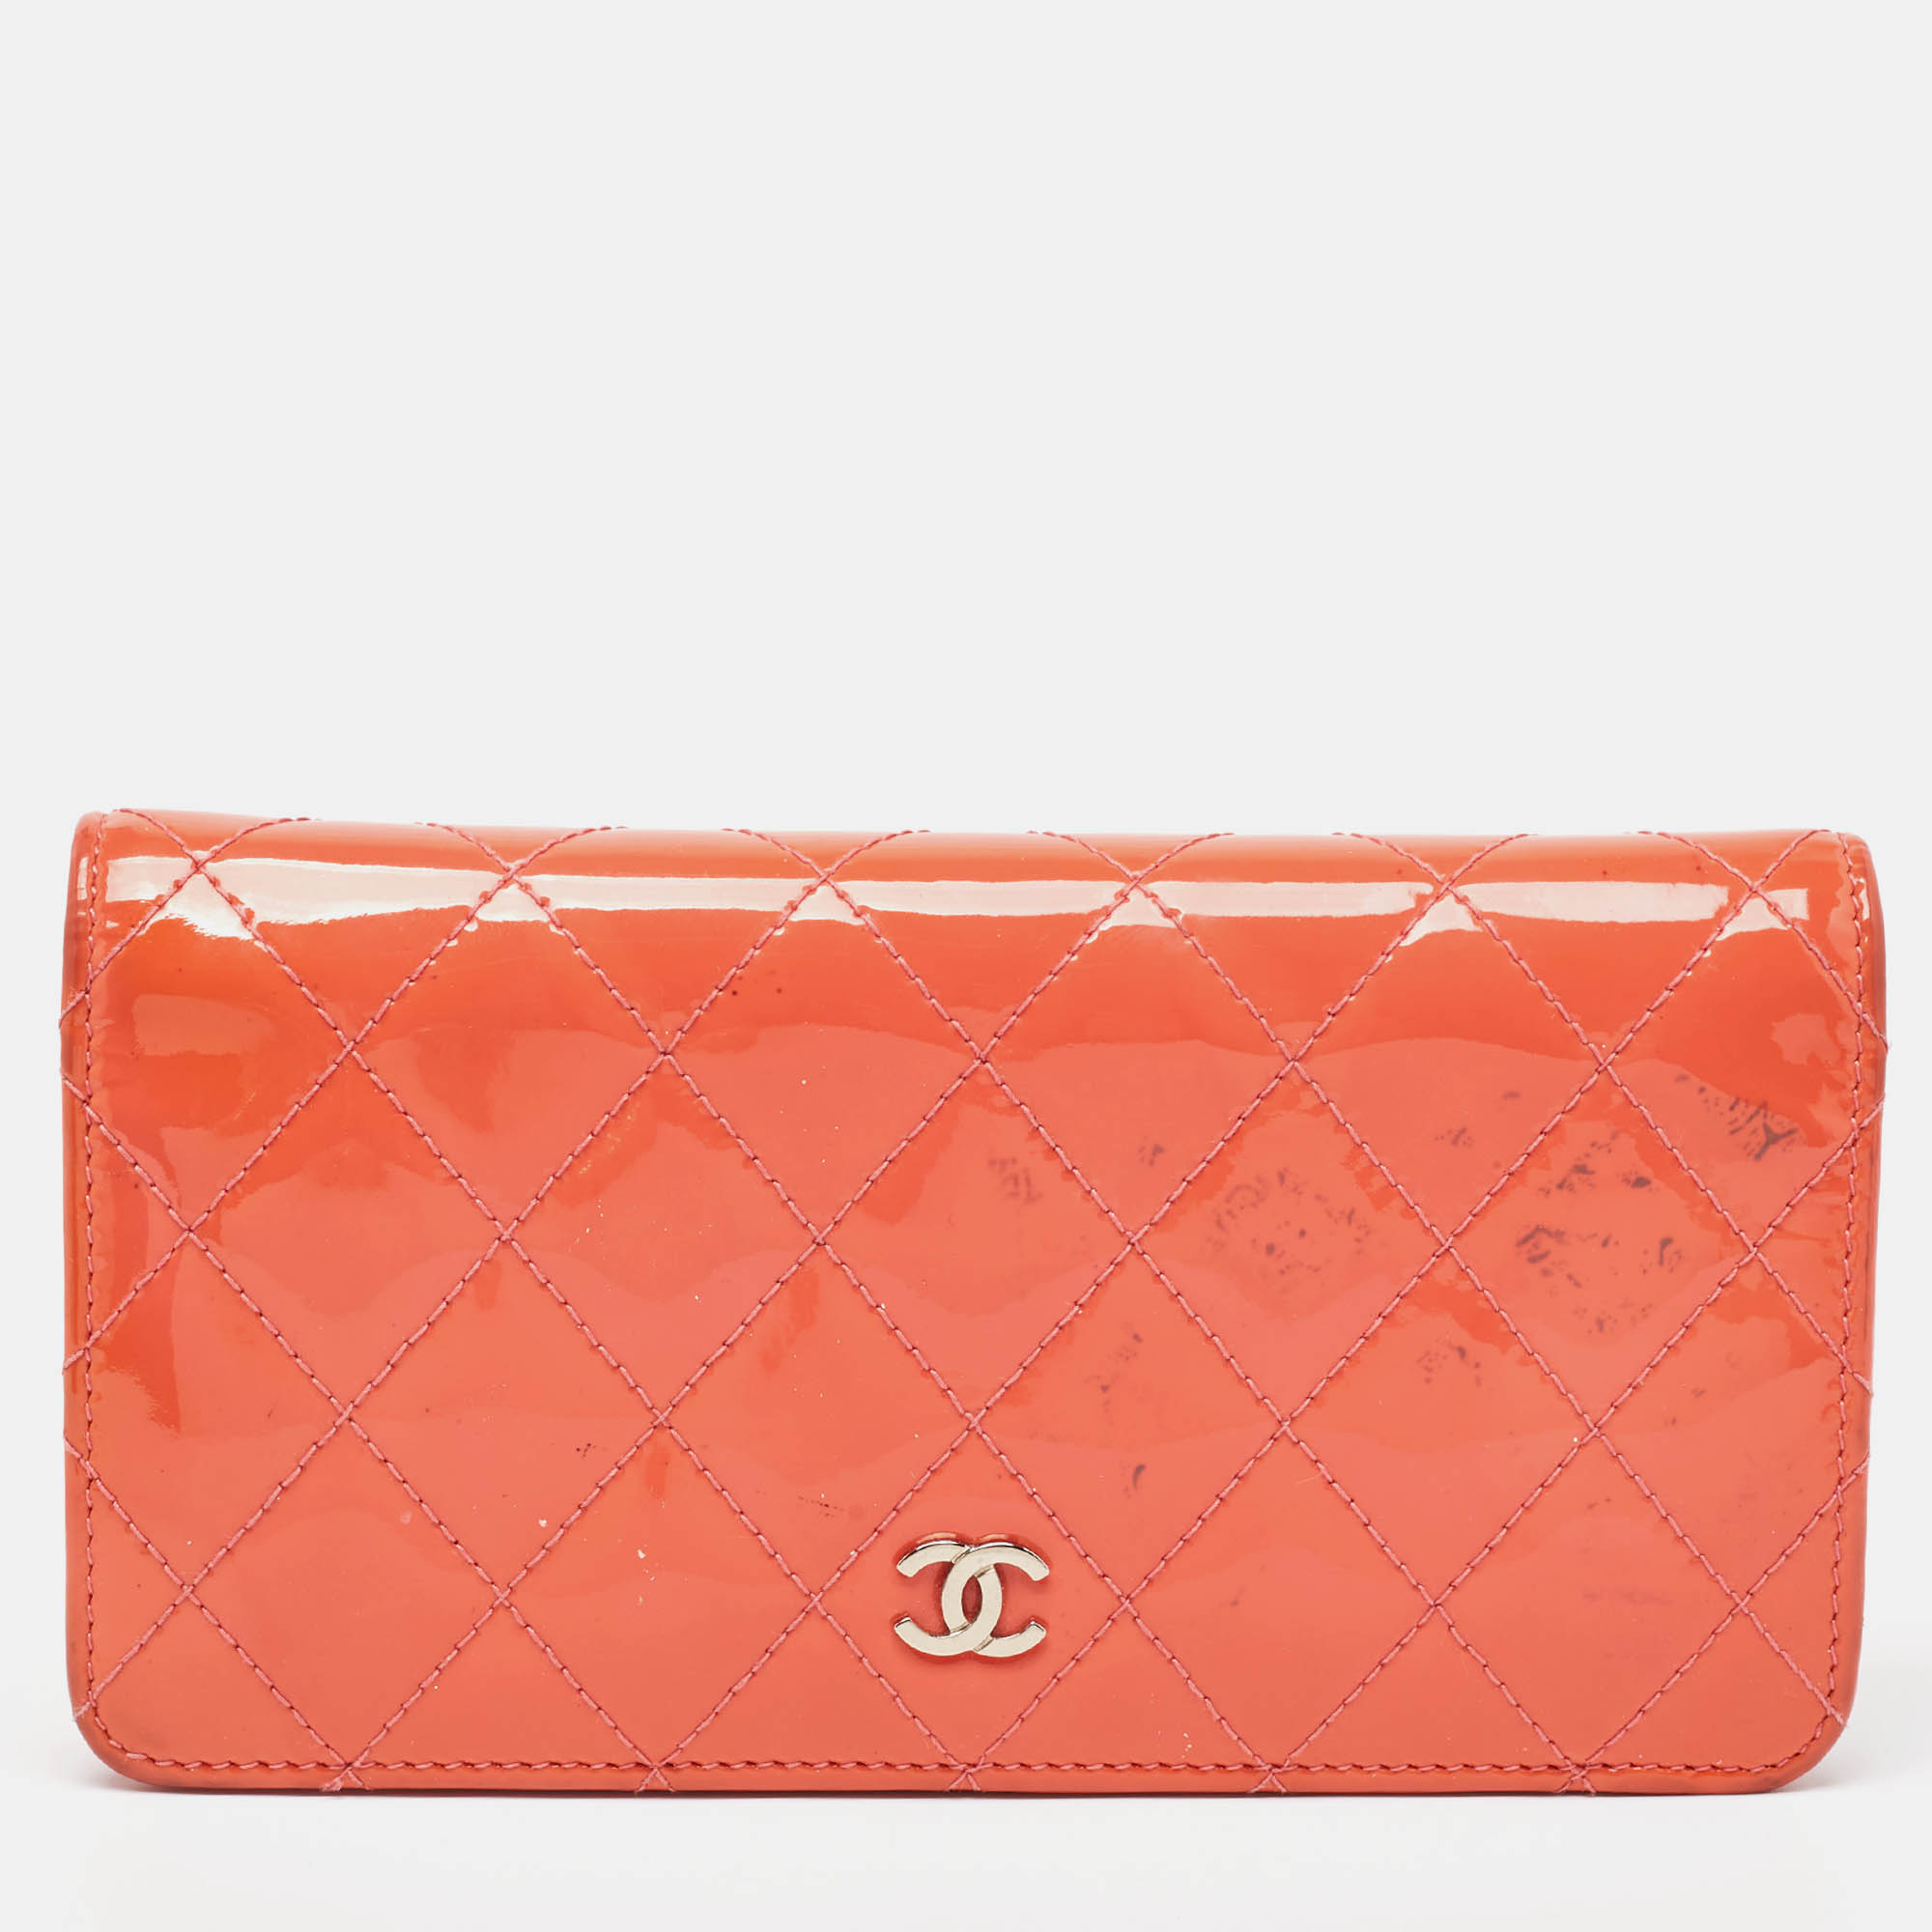 Pre-owned Chanel Orange Quilted Patent Leather Cc Yen Continental Wallet